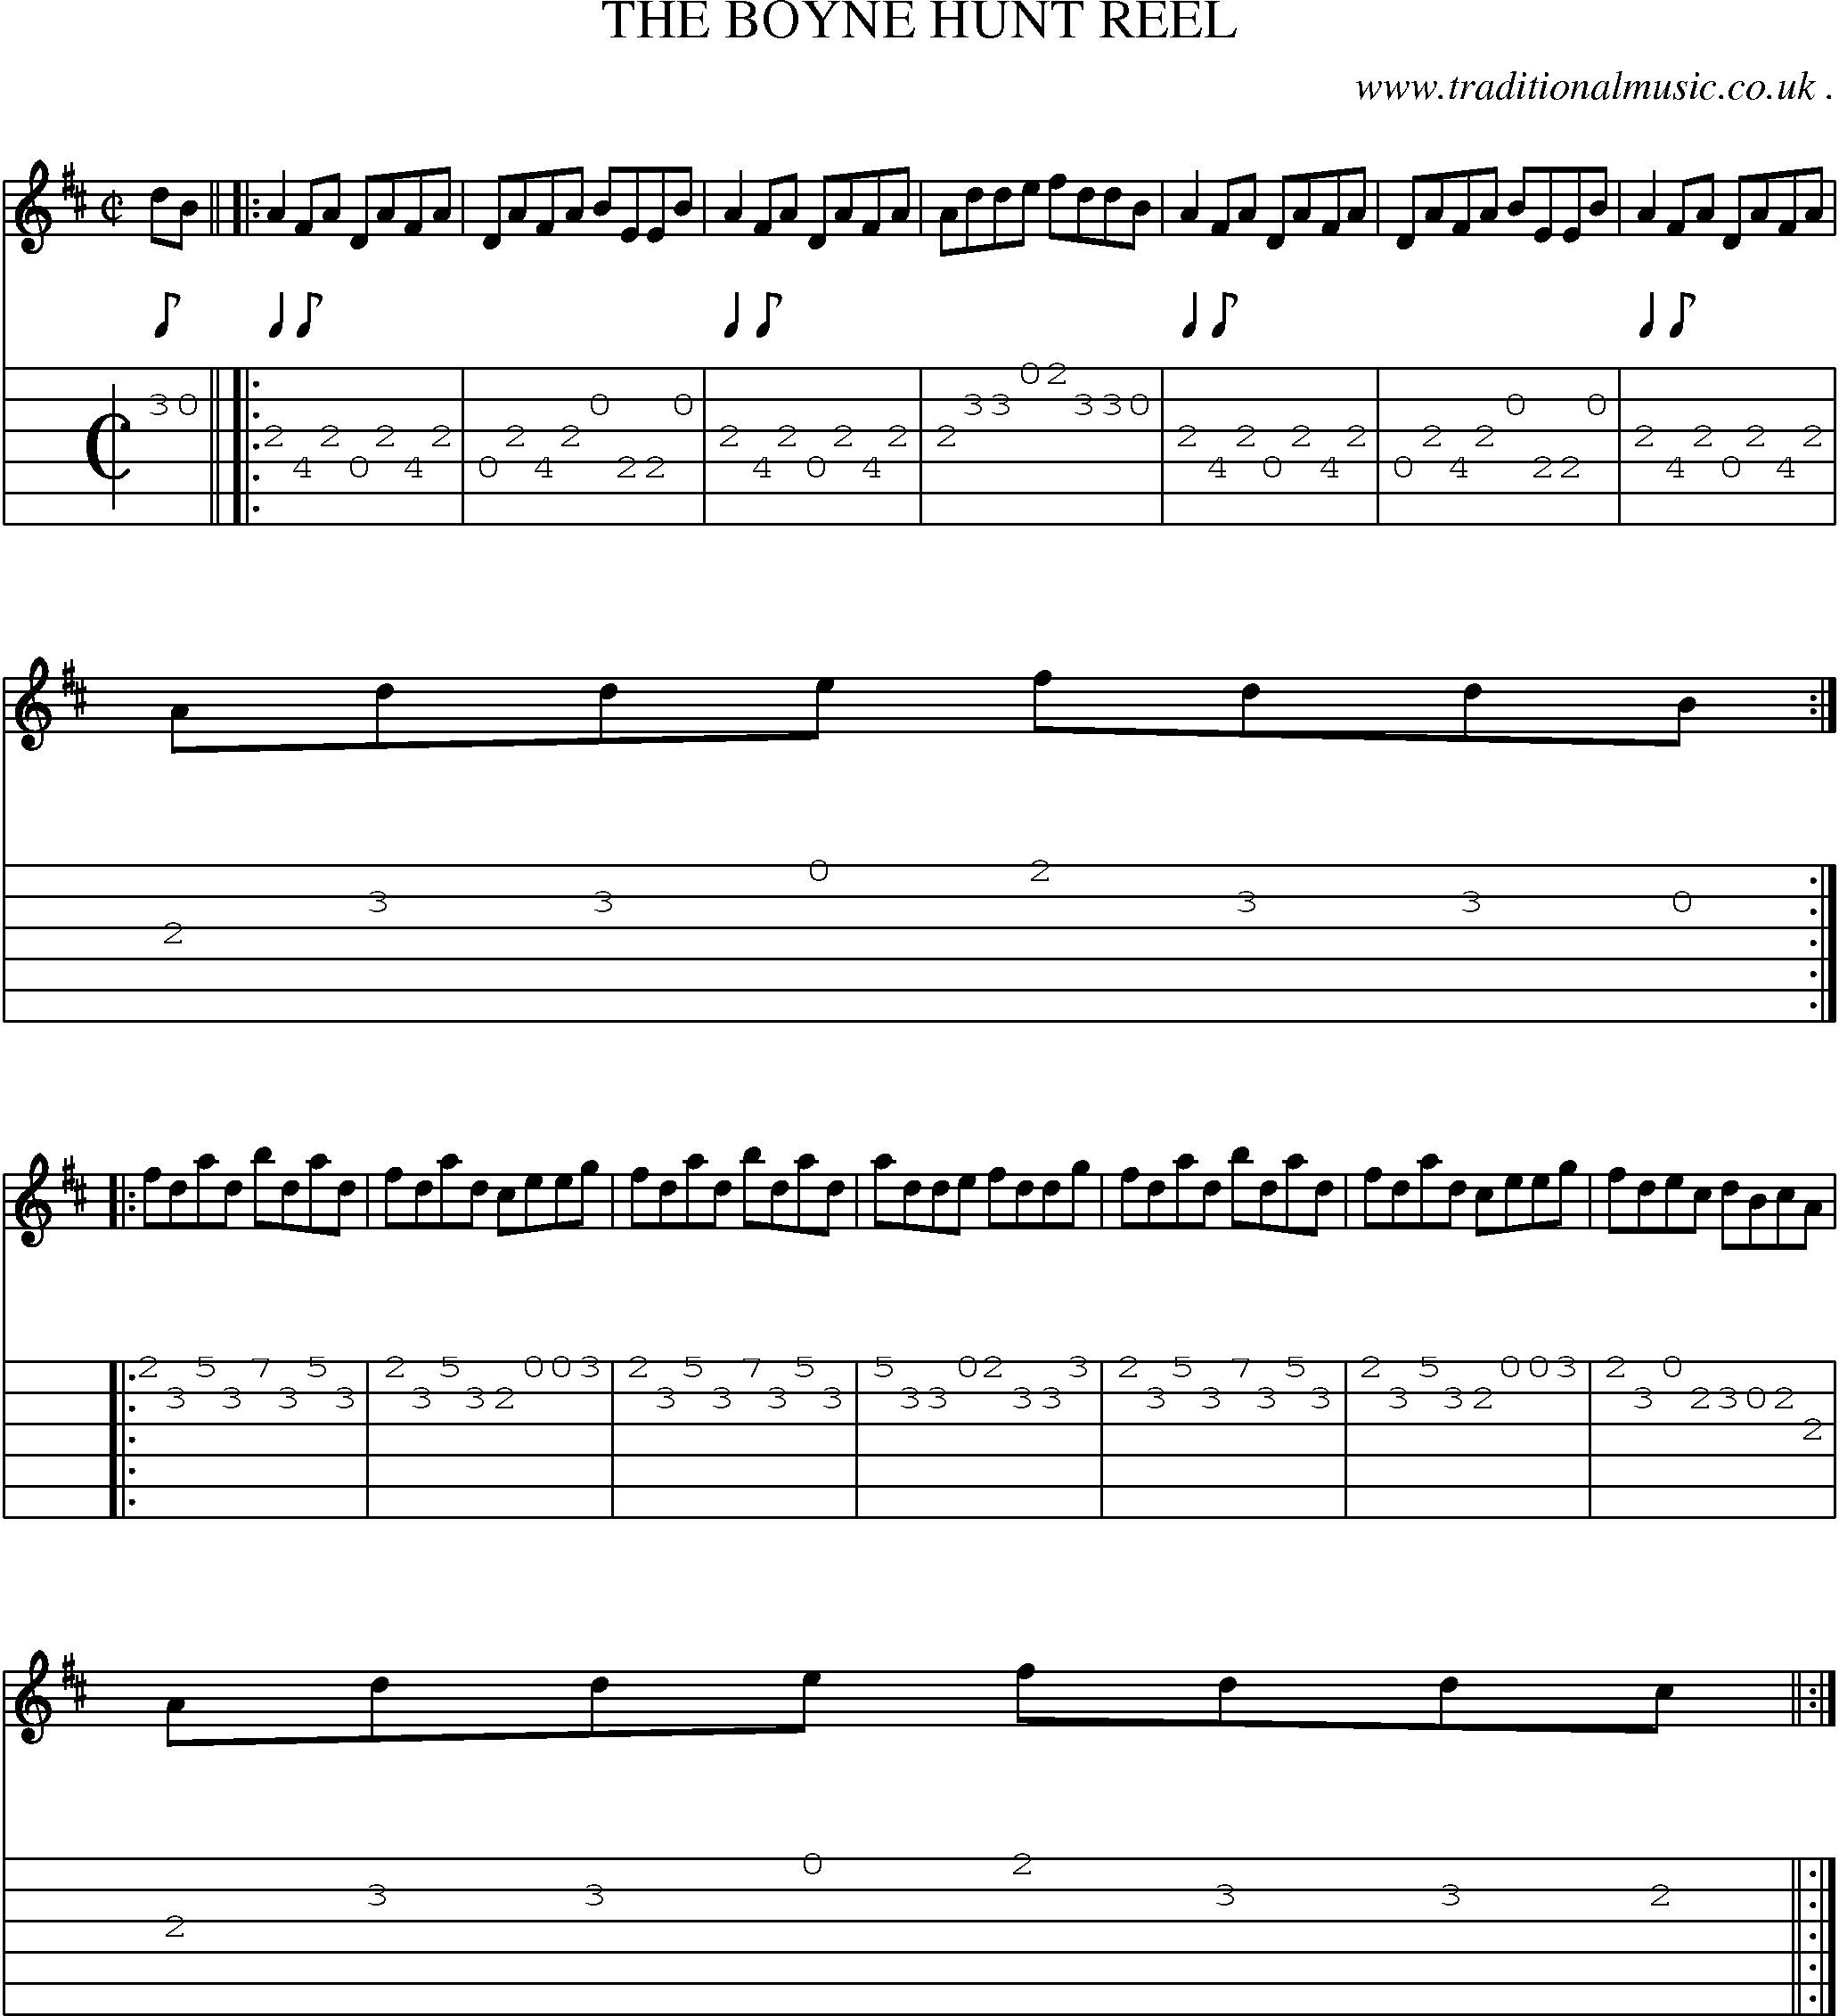 Sheet-Music and Guitar Tabs for The Boyne Hunt Reel